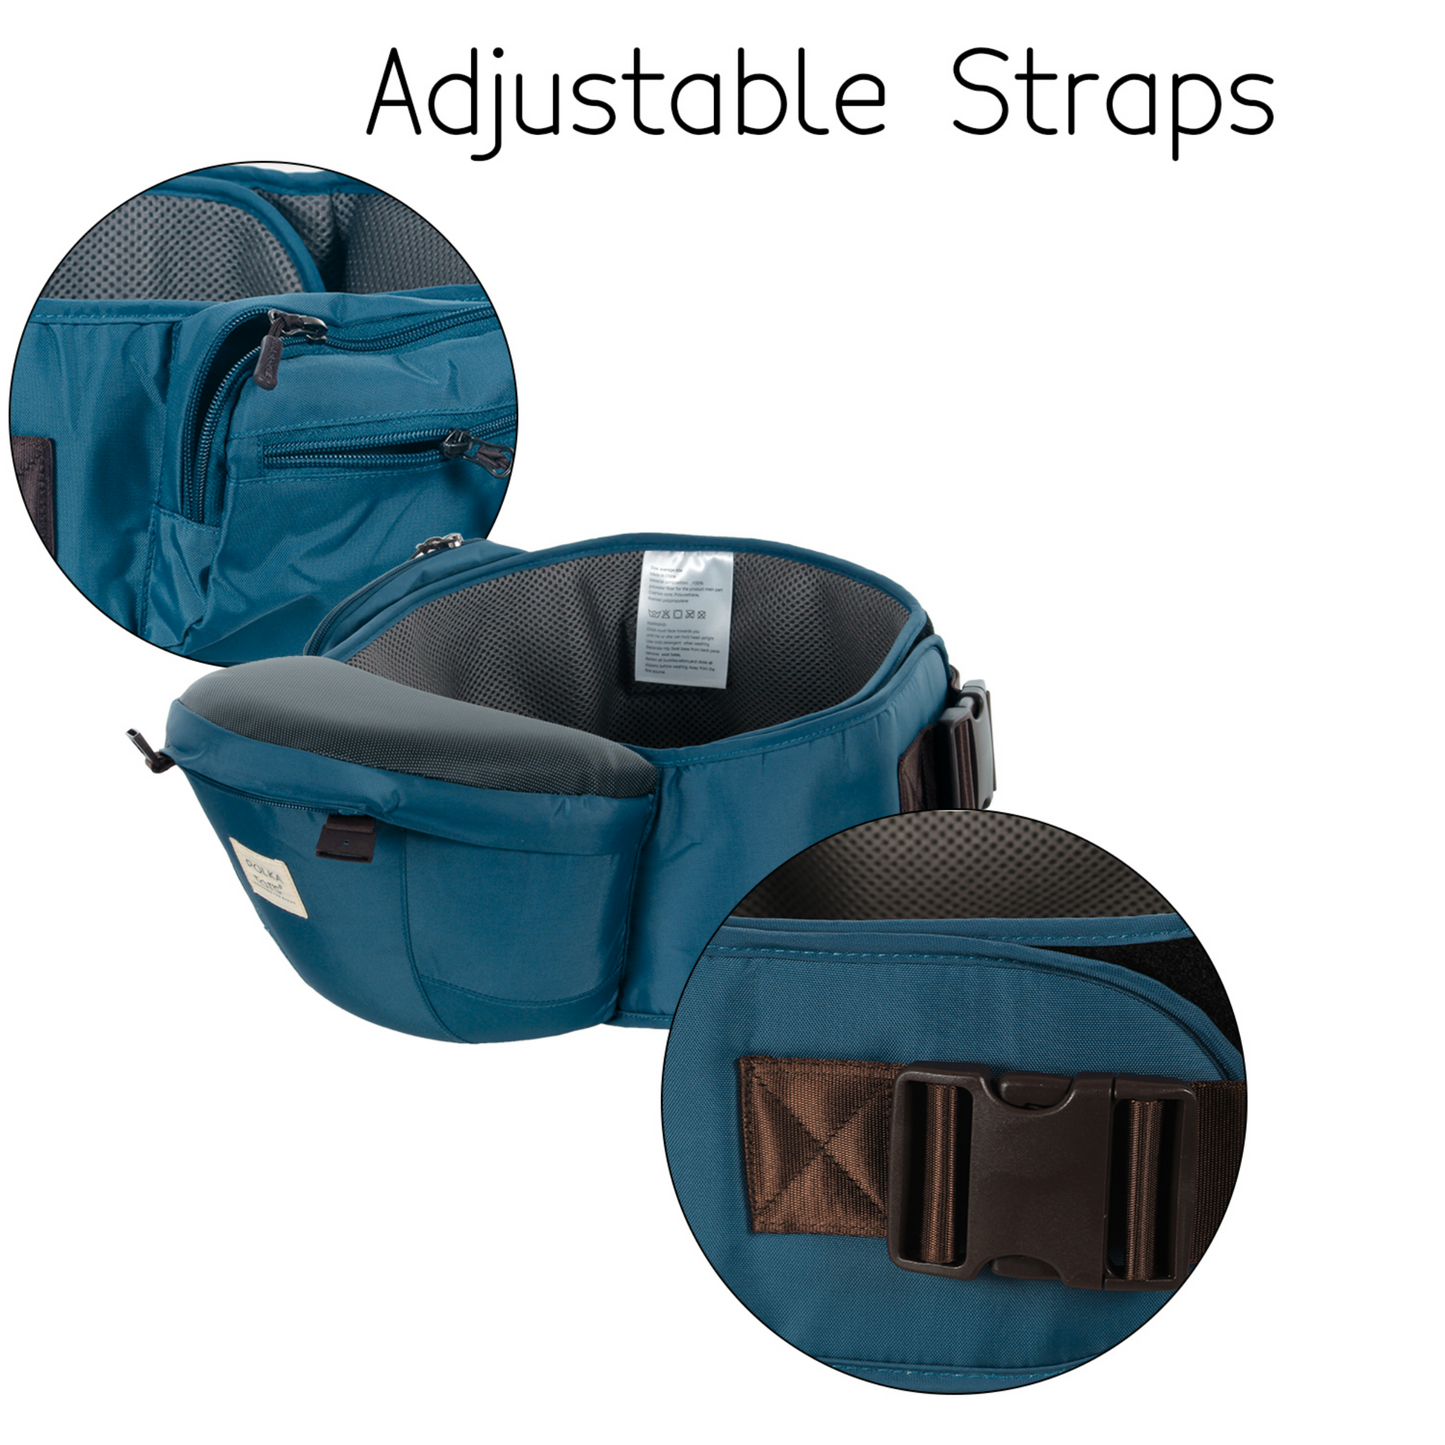 Ergonomic Baby Hip Seat / 6 in 1 Baby Carrier With Trendy Carry Bag (Blue)